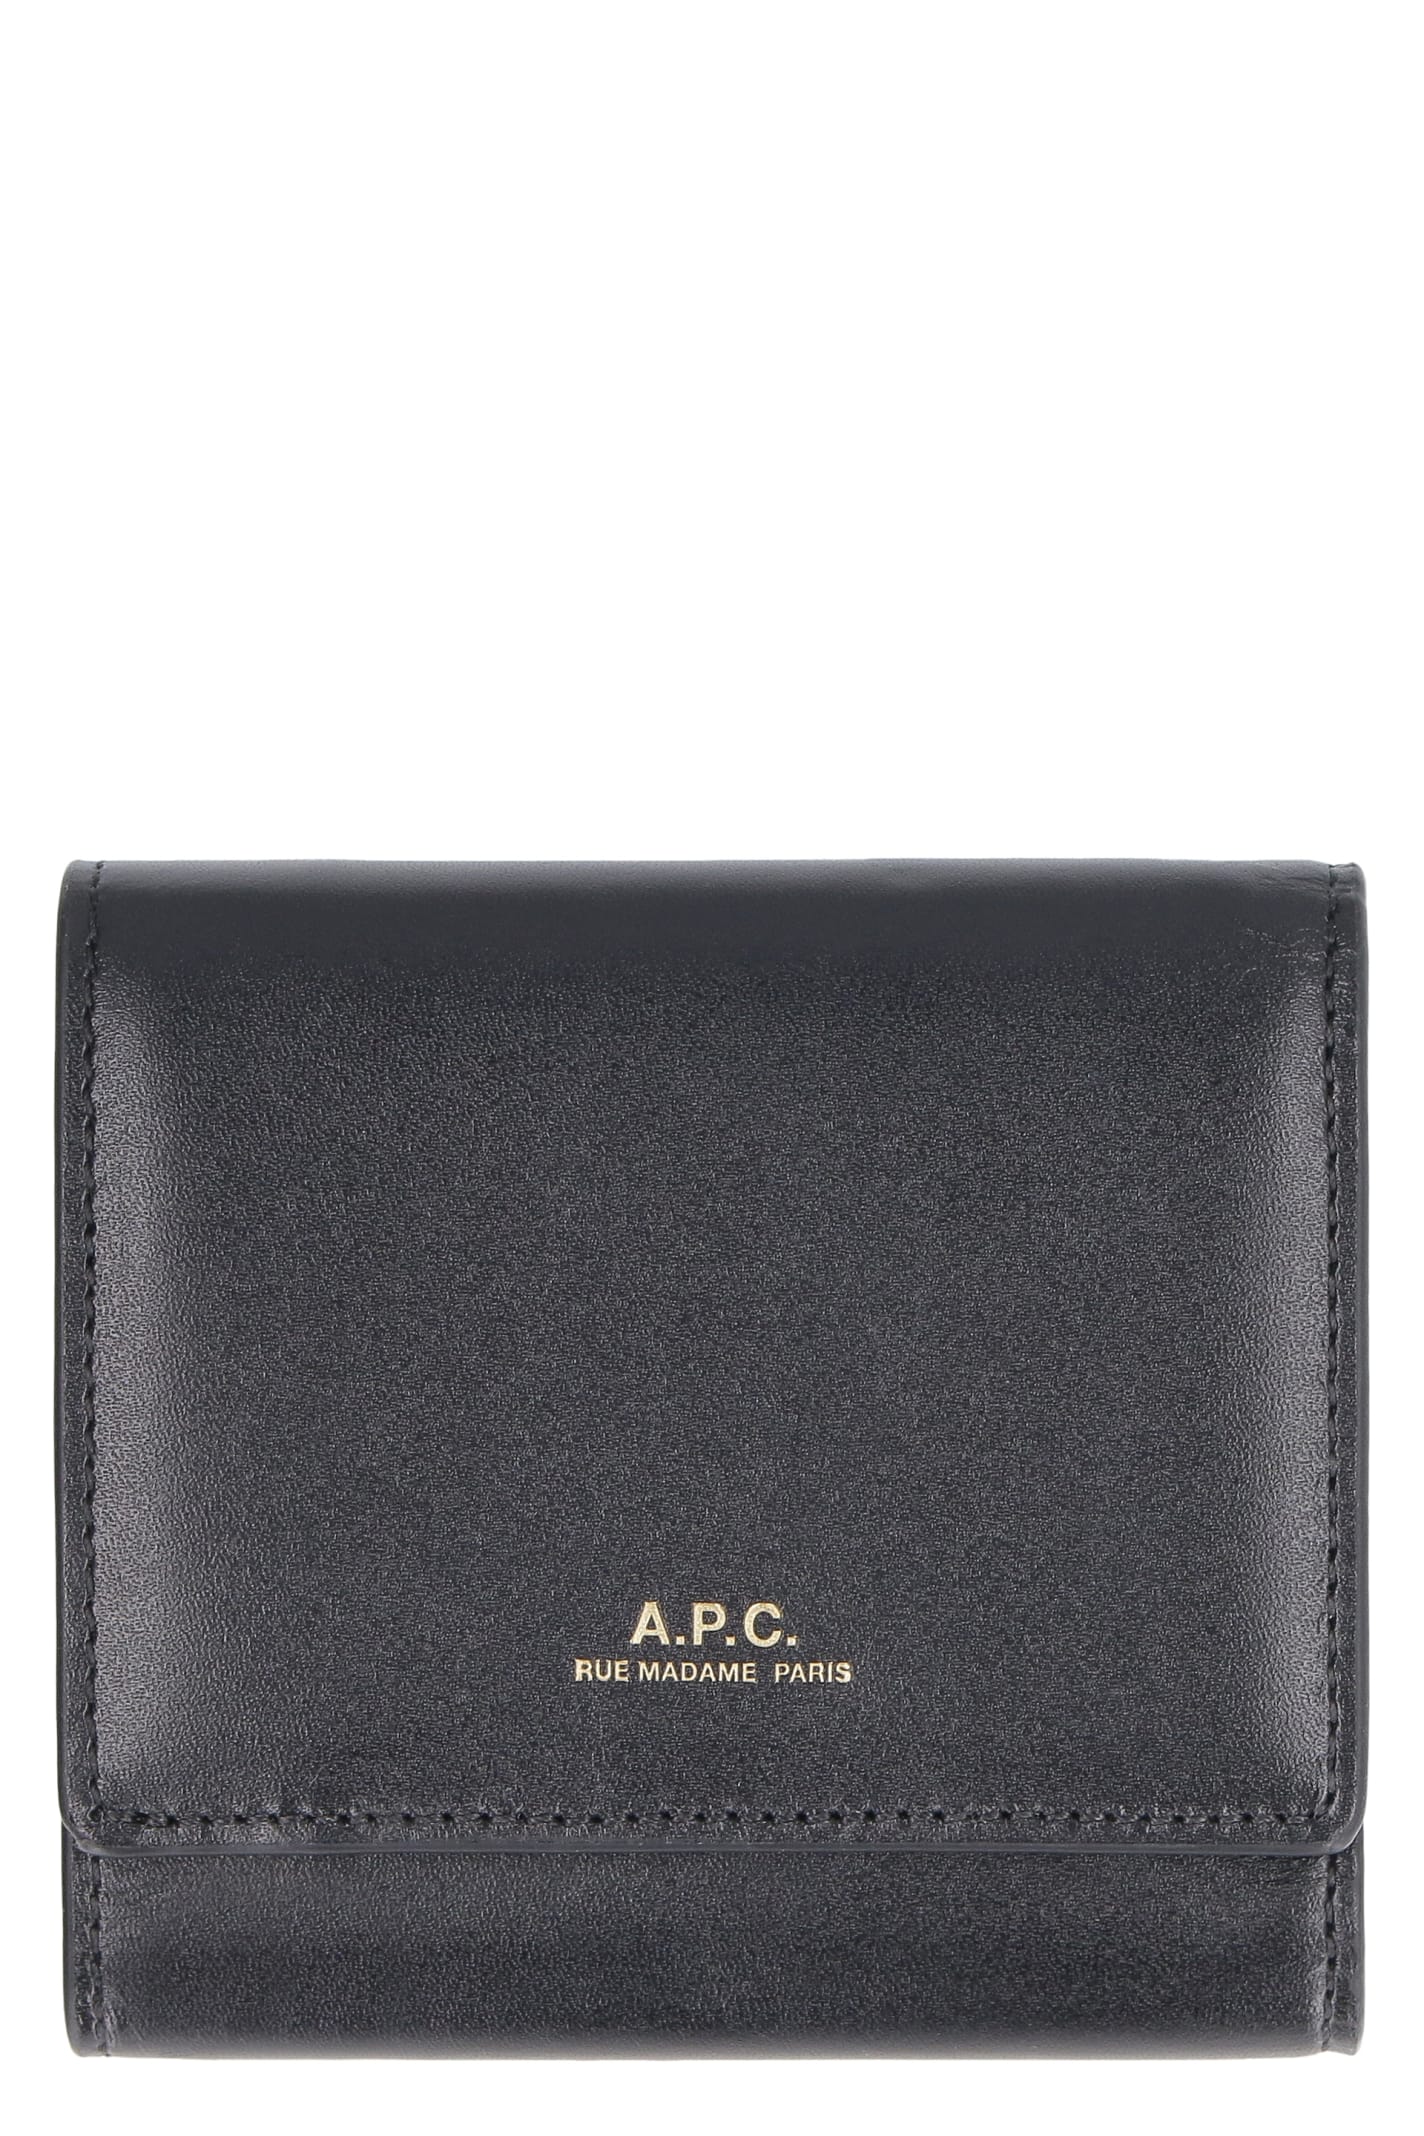 A.P.C. Micro Leather Wallet